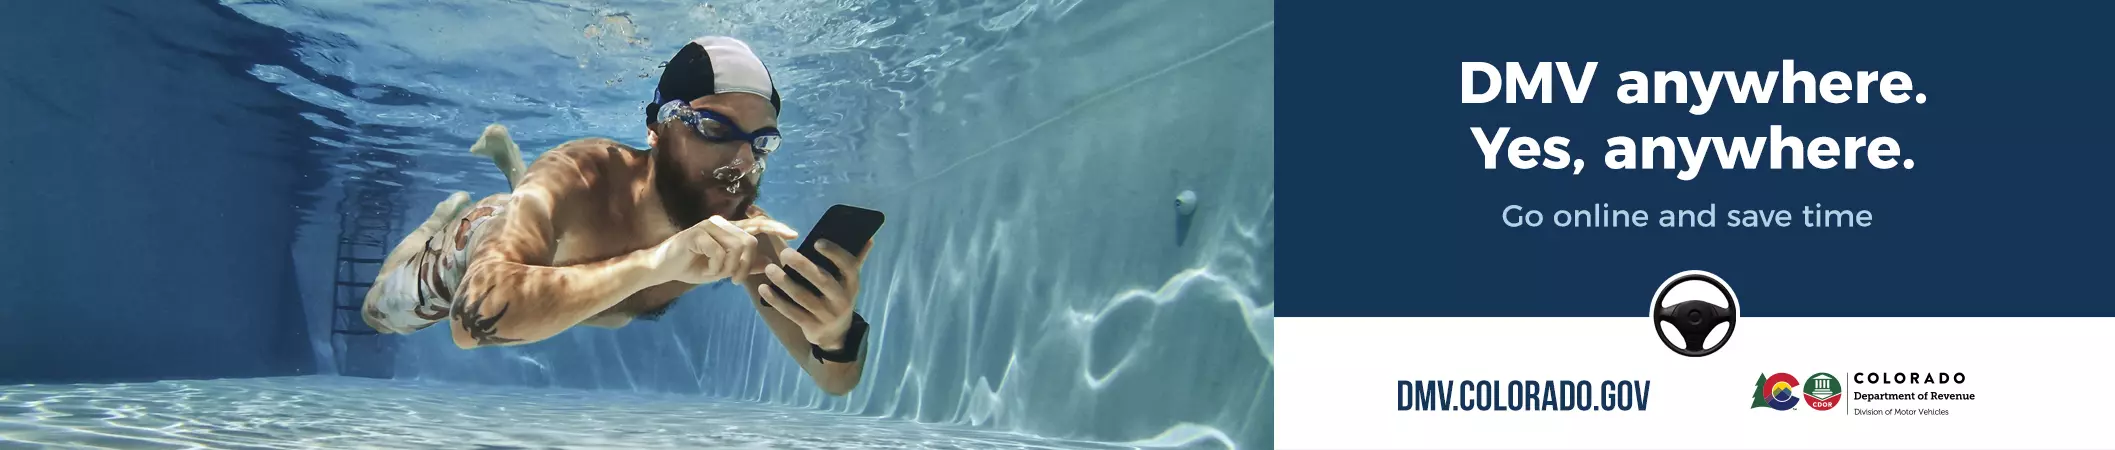 Swimmer underwater on cell phone with sign that says DMV Anywhere. Yes, Anywhere.